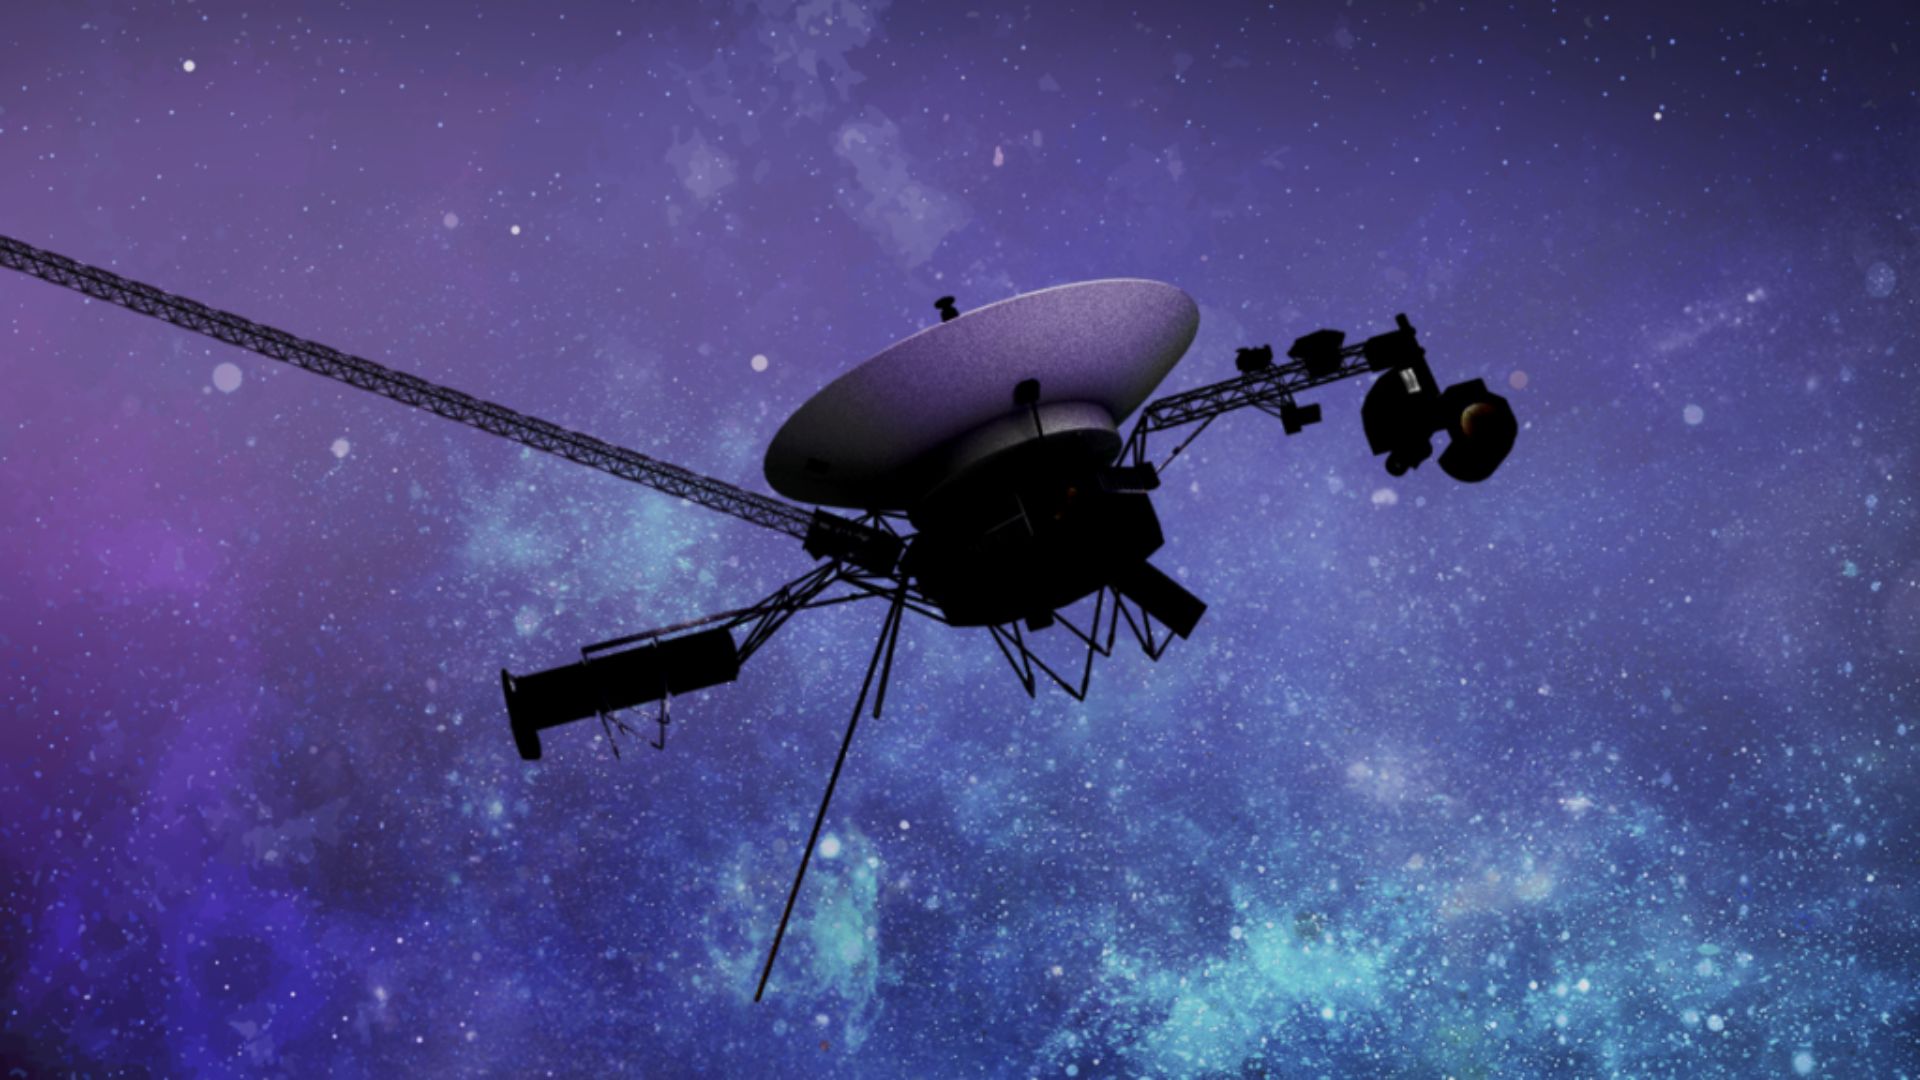 NASA hears from Voyager 1, 46-year-old most distant spacecraft - Interesting Engineering